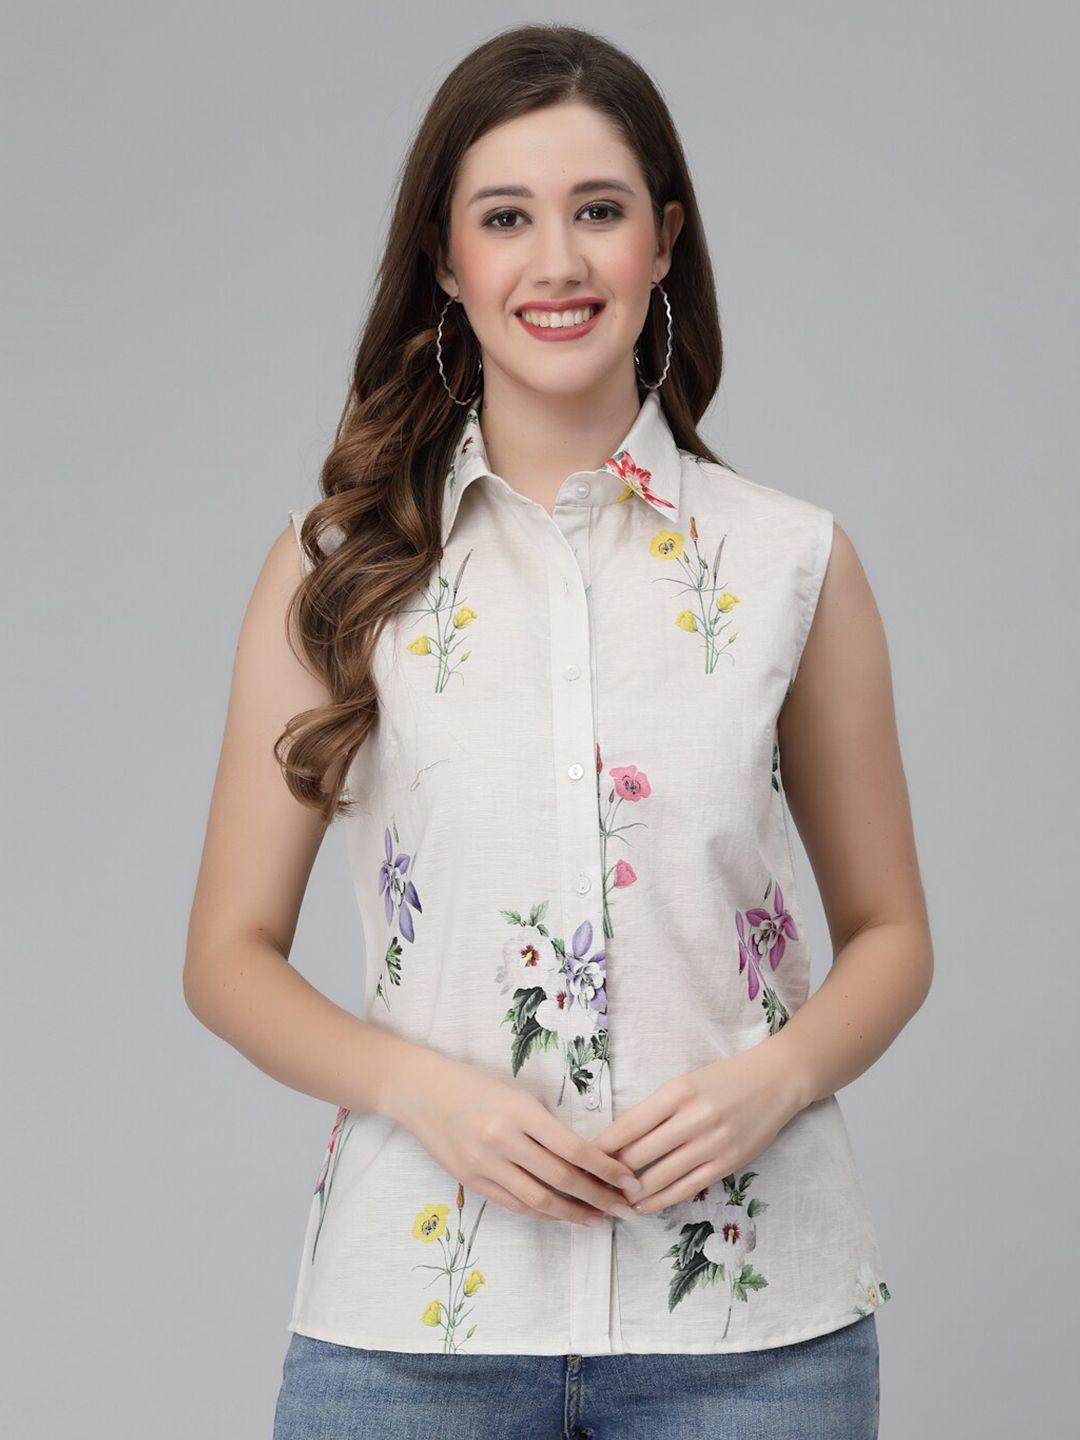 wool trees floral printed spread collar sleeveless casual shirt